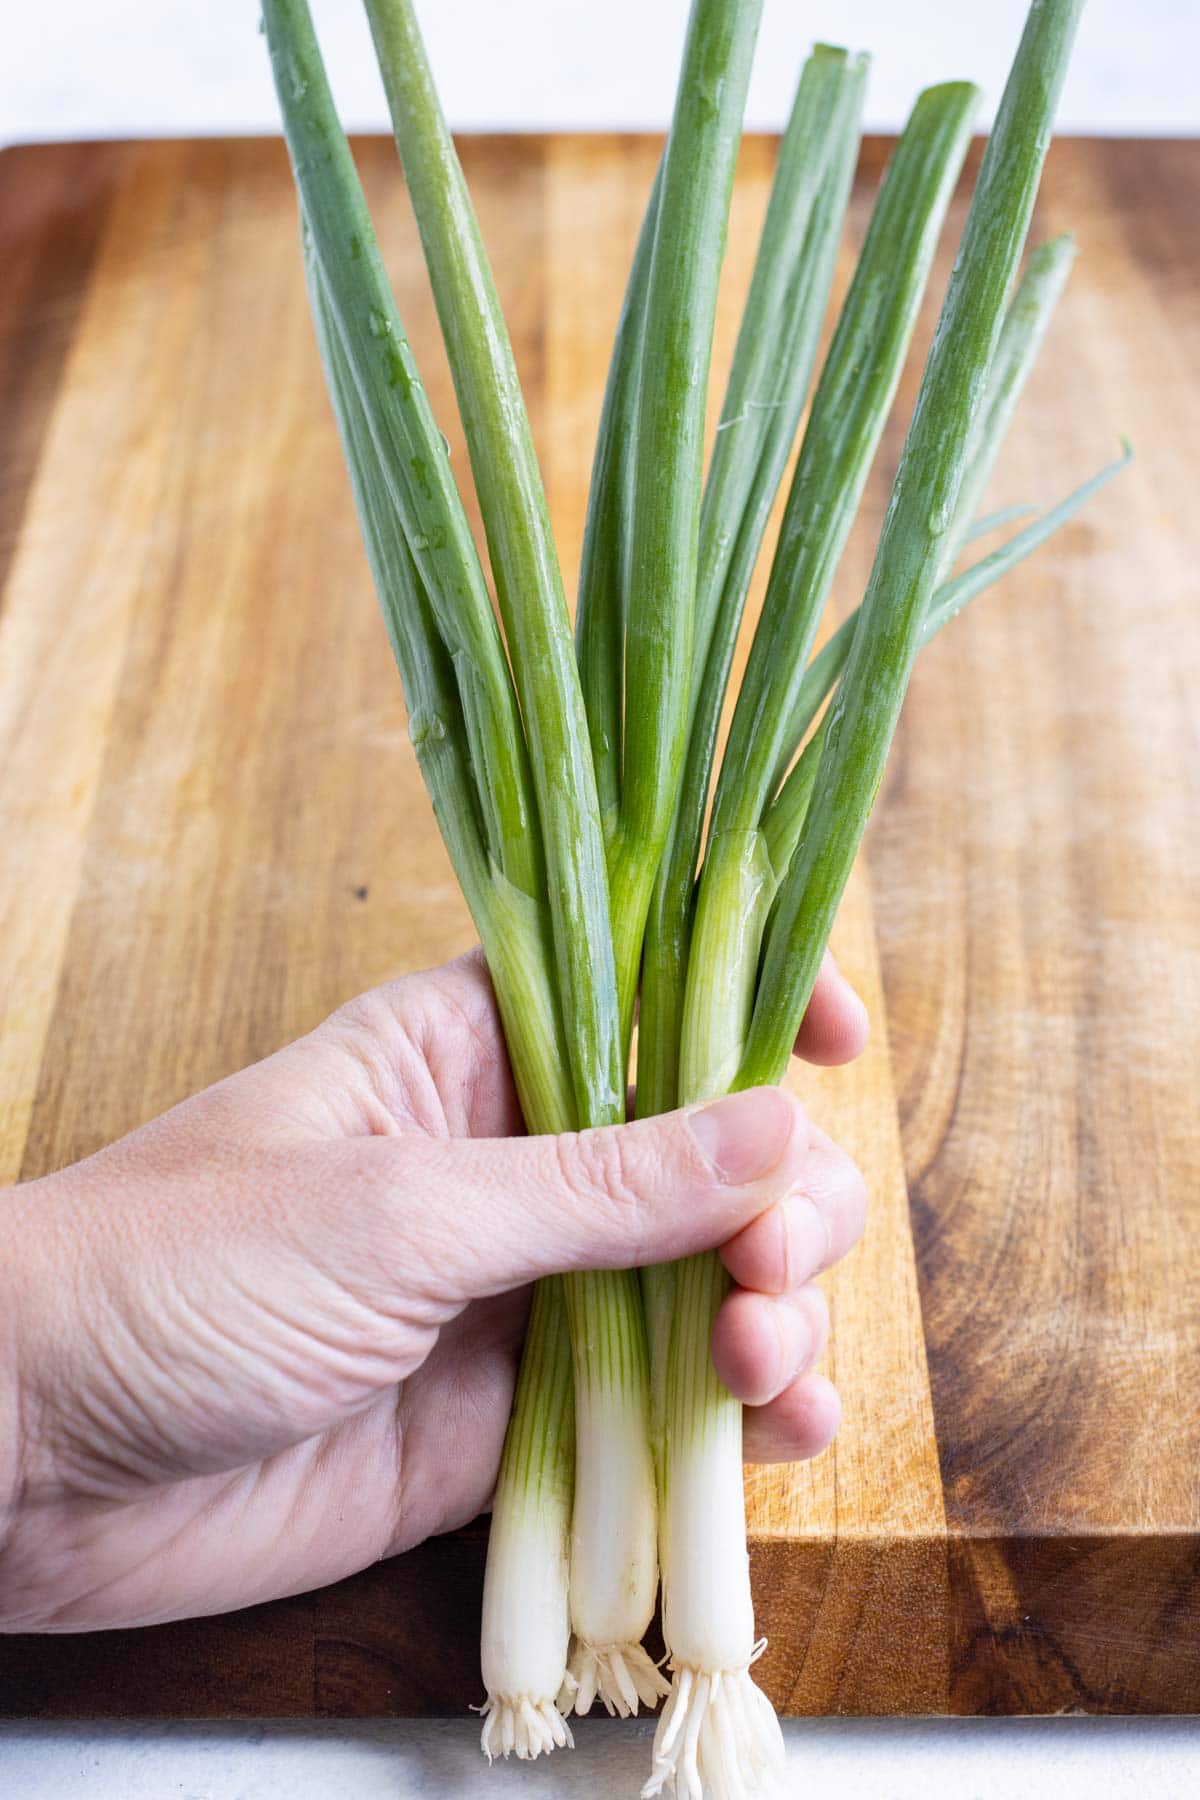 A hand is shown holding a bunch of green onions.